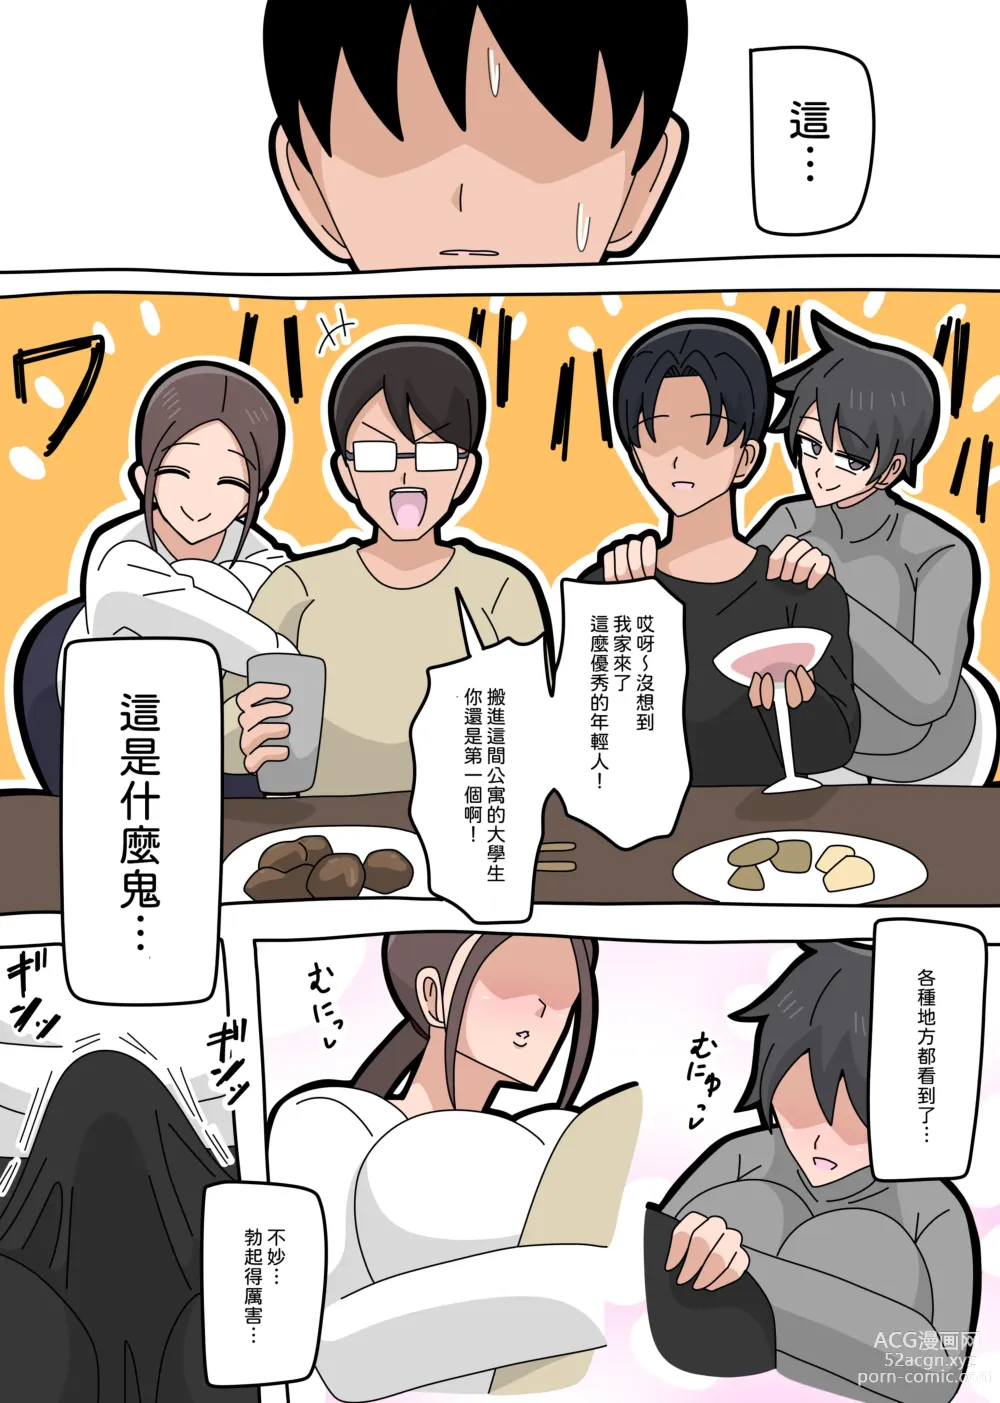 Page 5 of doujinshi 強勢人妻